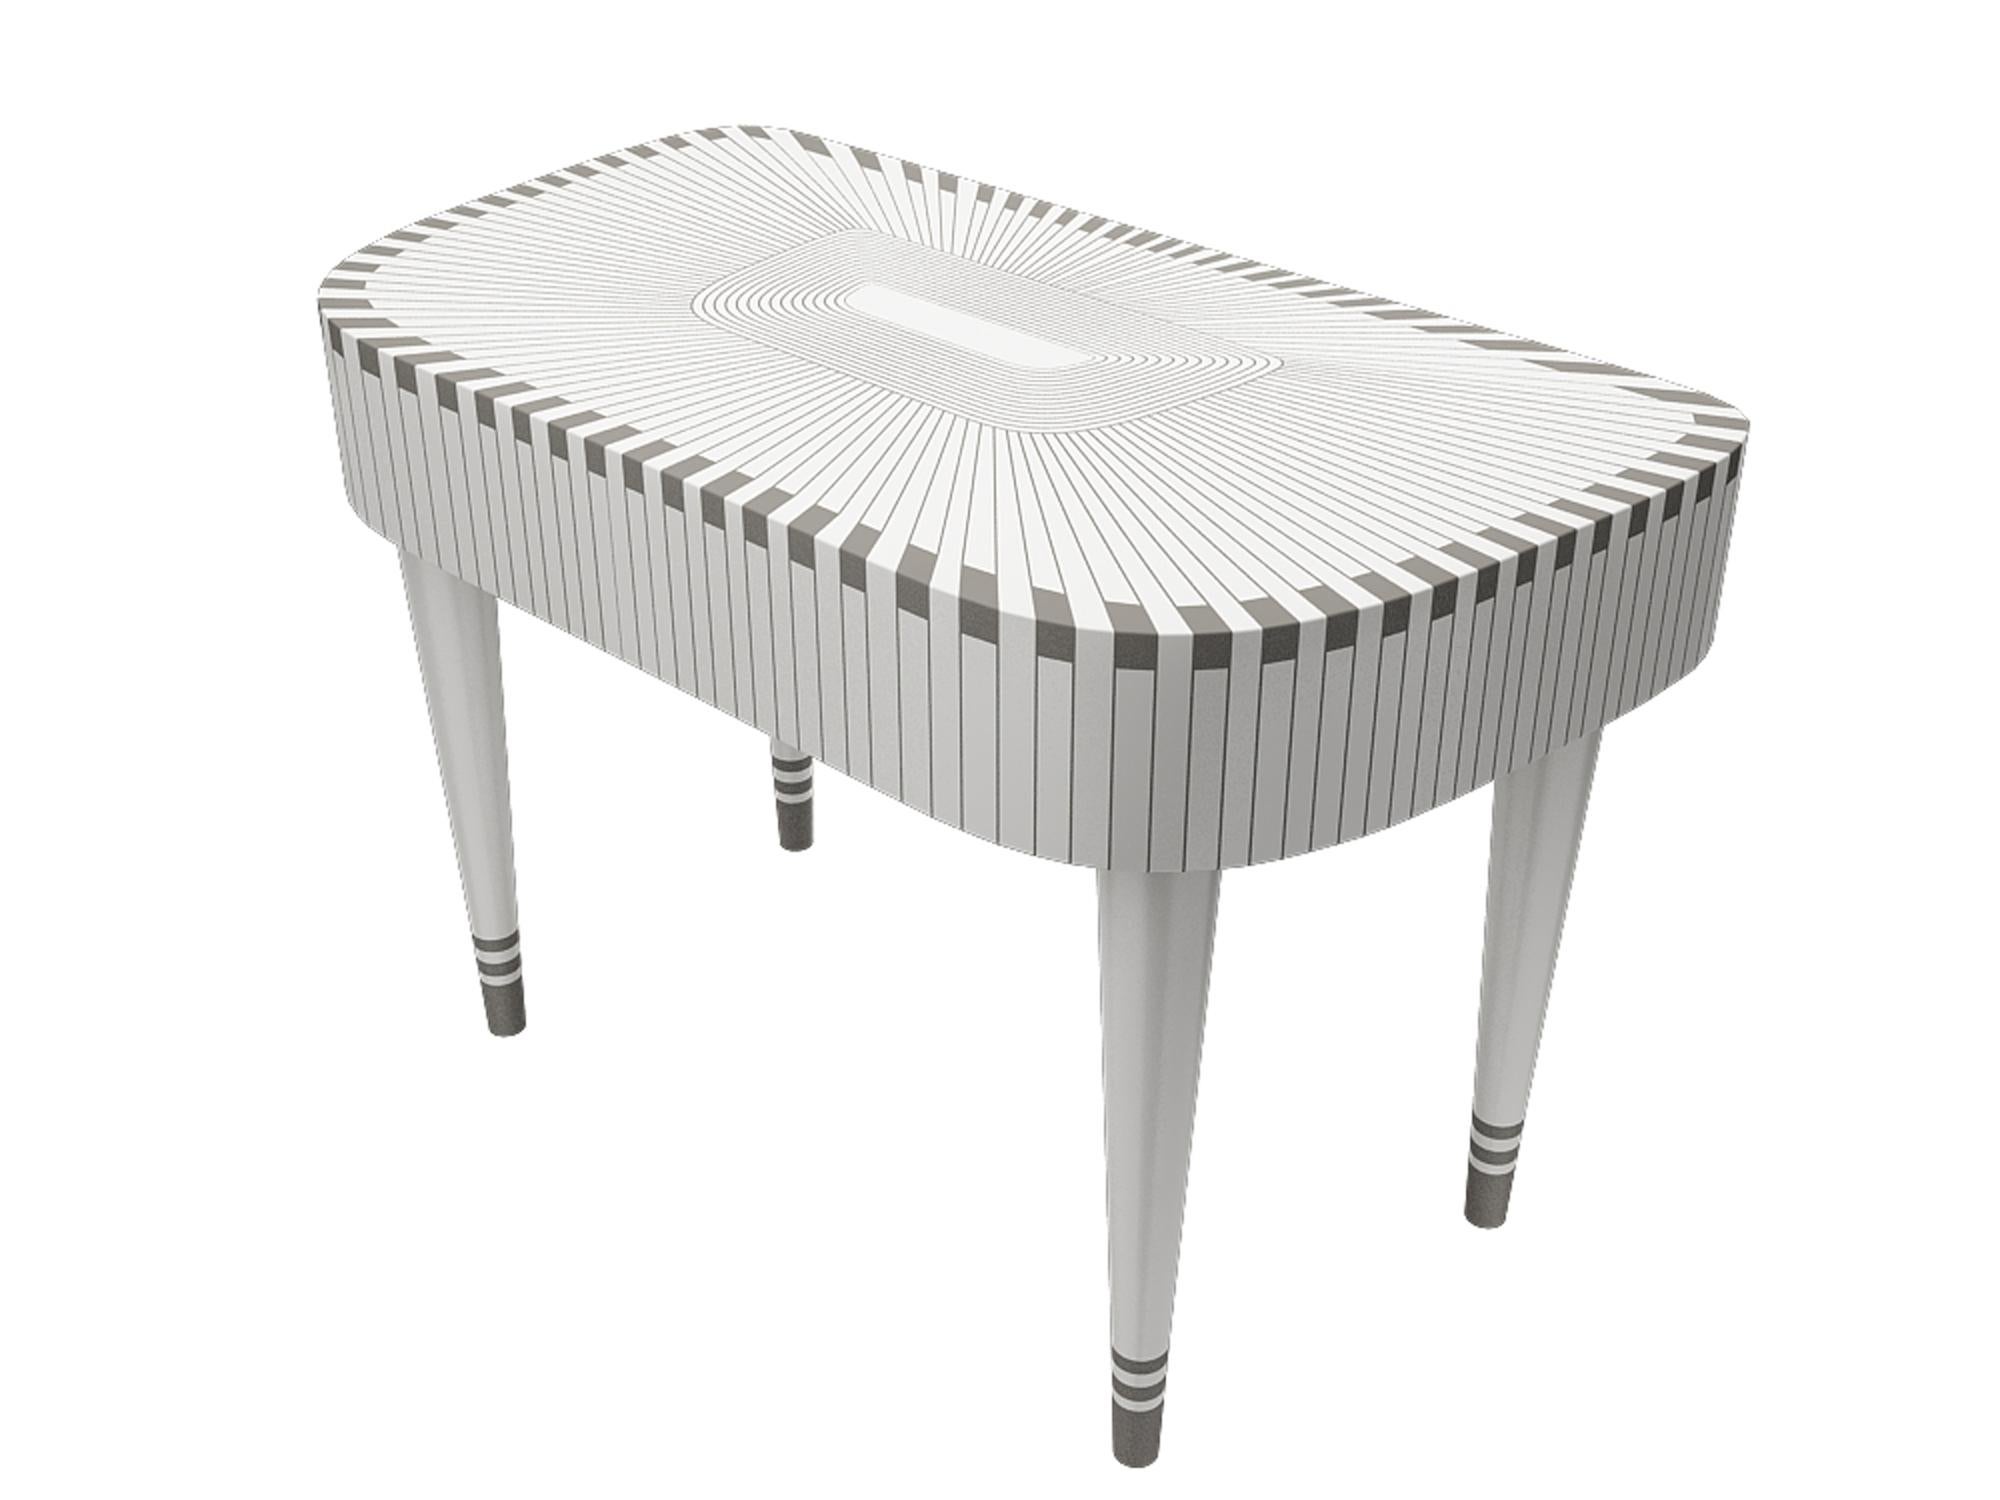 Paris Bureau White and Gray Study Desk Writing Table by Matteo Cibic is an extraordinary console/writing table, with two drawers. It is available in a range of colors, which can be customized according to the space.

India's handicrafts are as